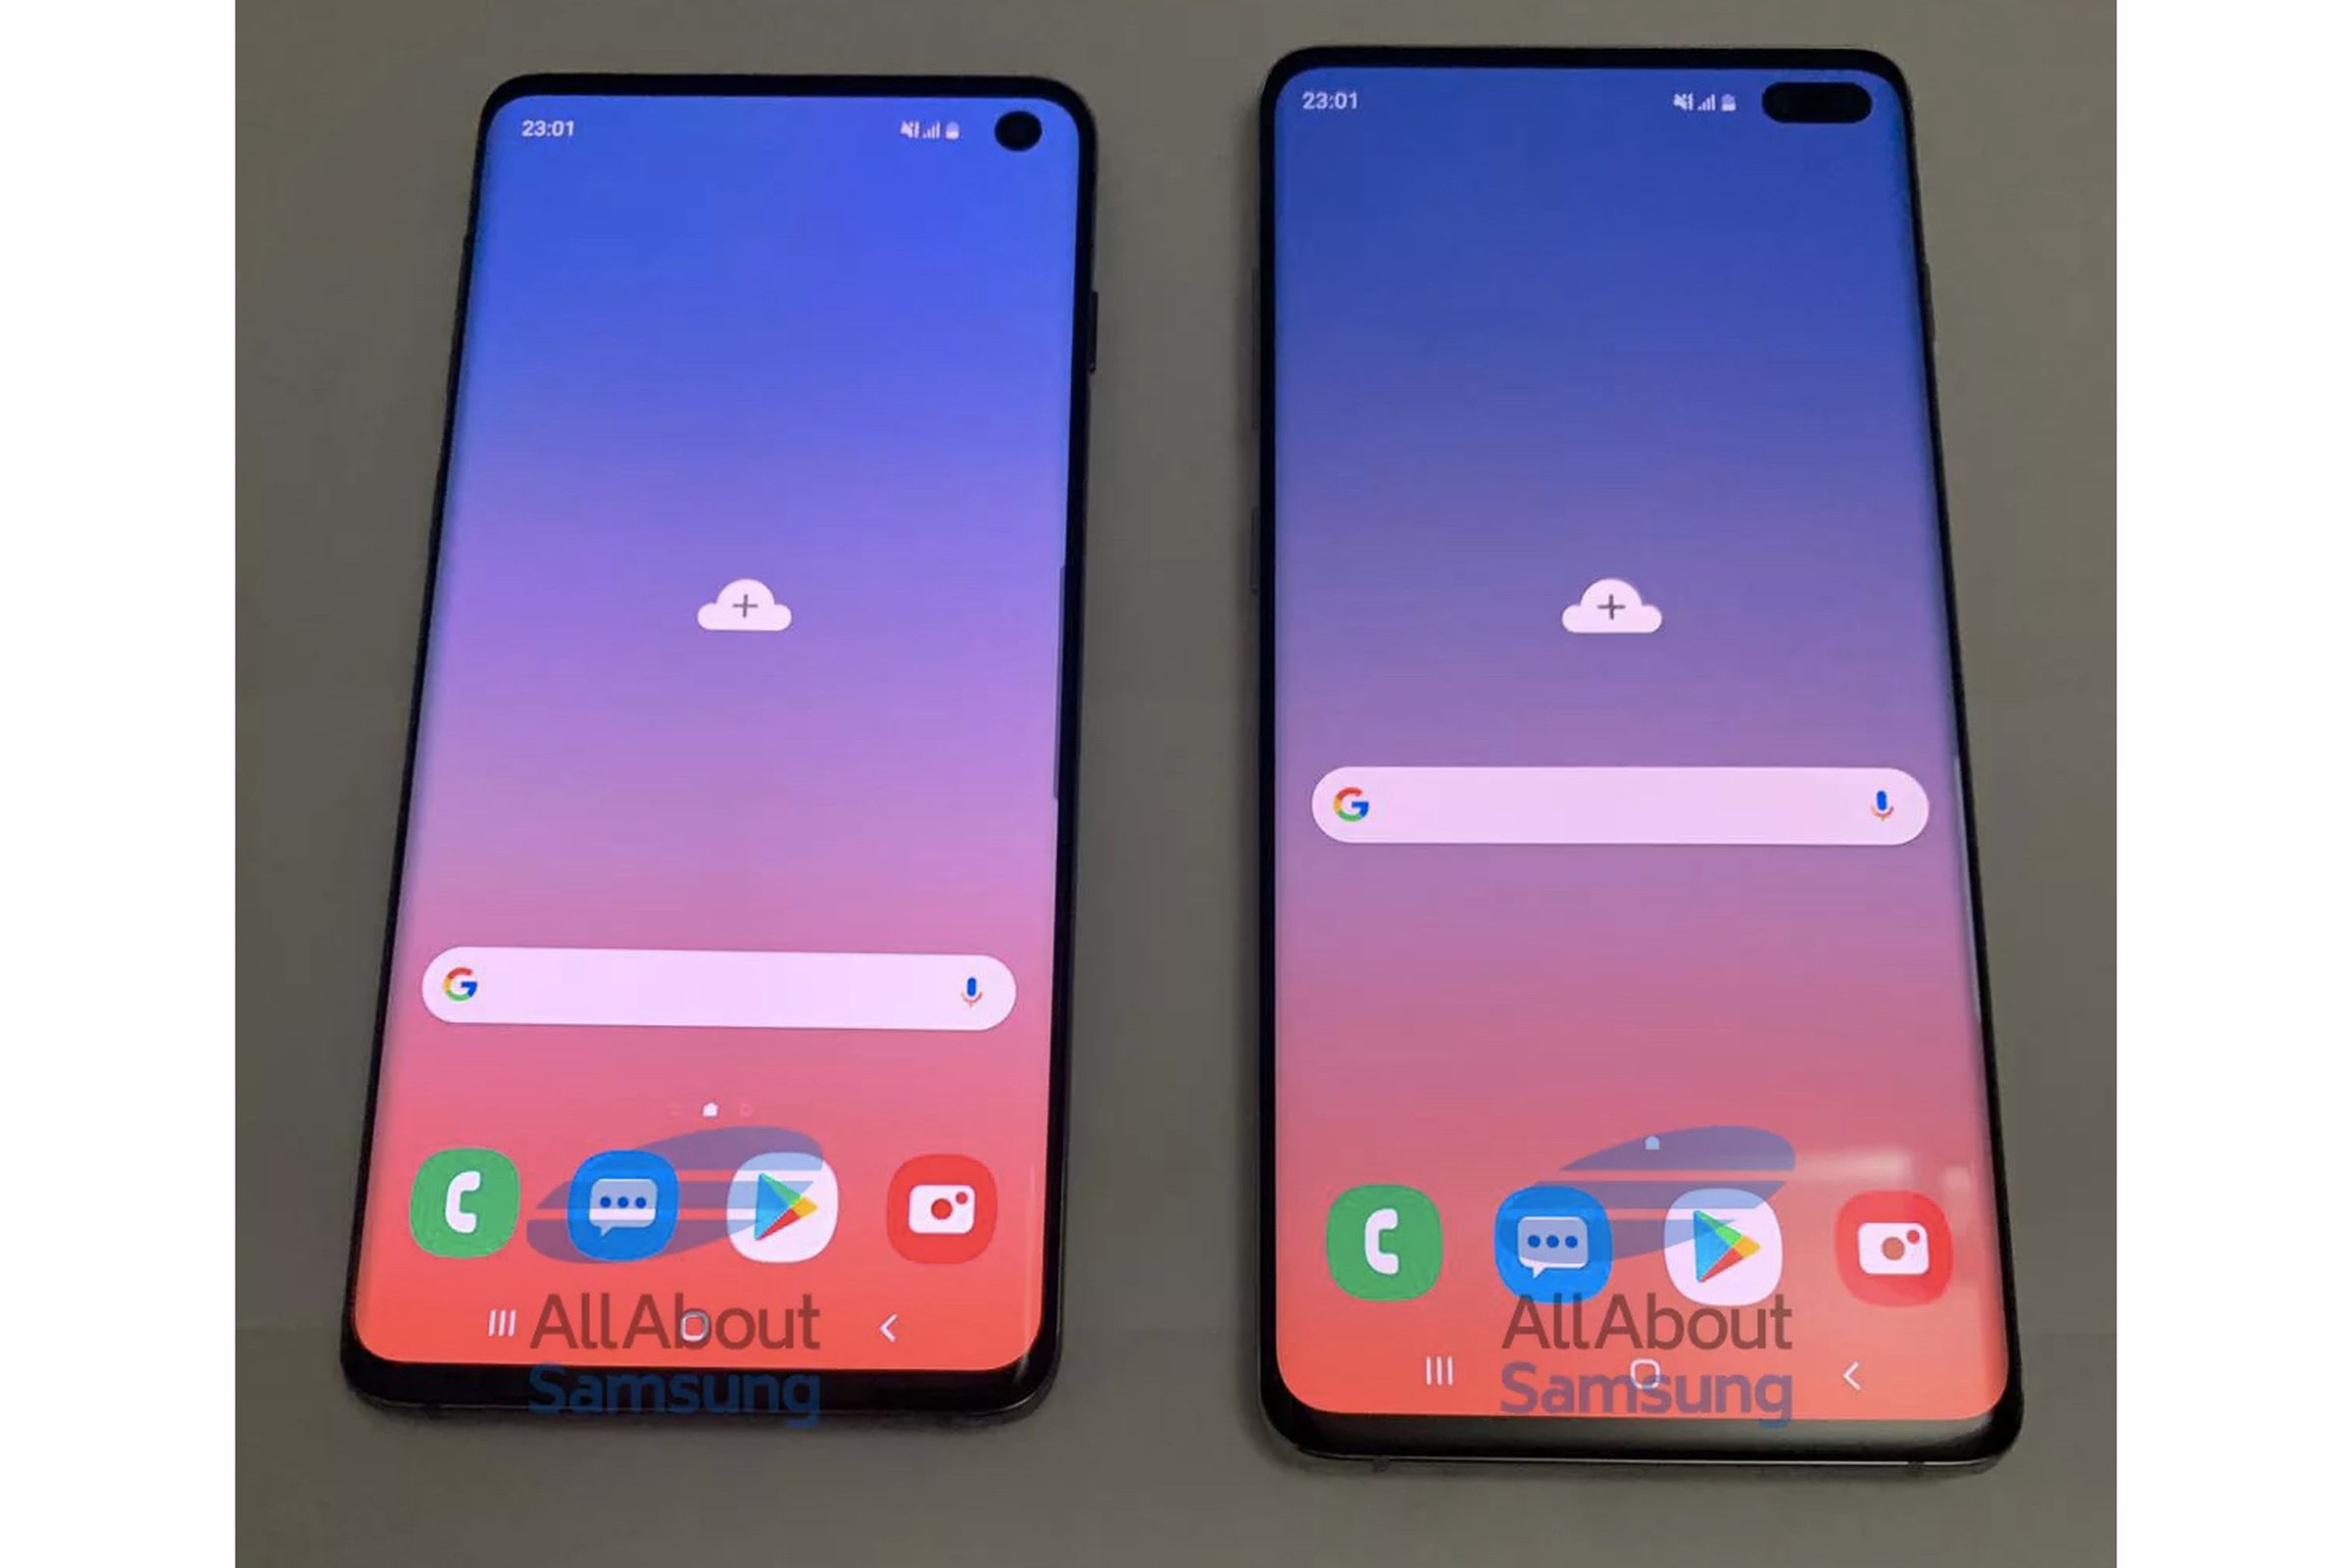 Images supposedly showing the new upcoming Galaxy S10 and S10+